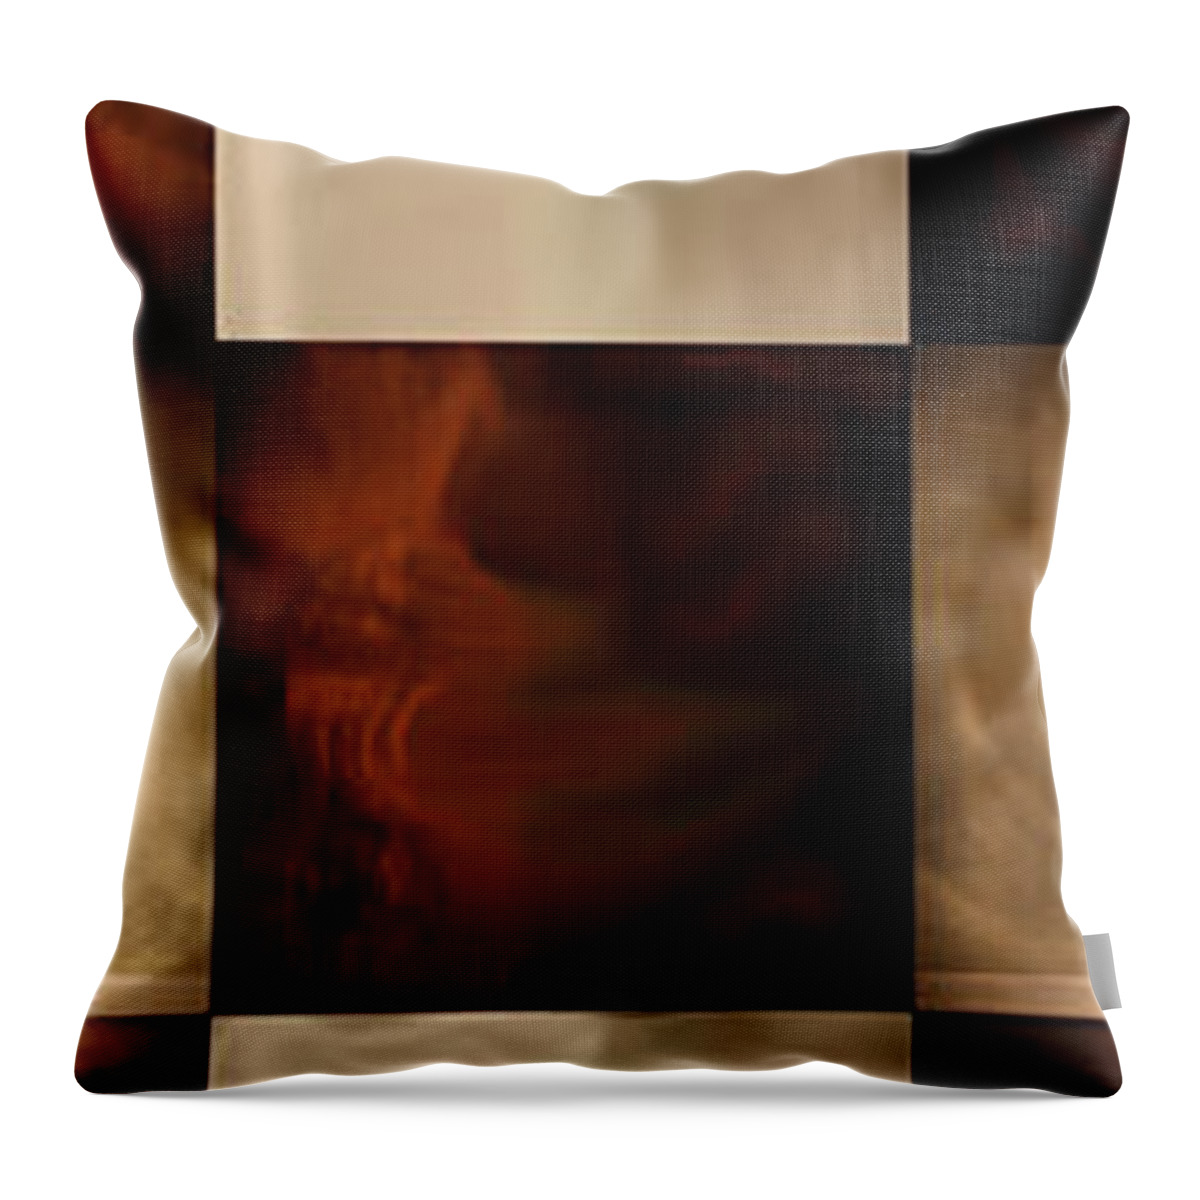 Chessboard Throw Pillow featuring the photograph Chessboard by Andrei SKY